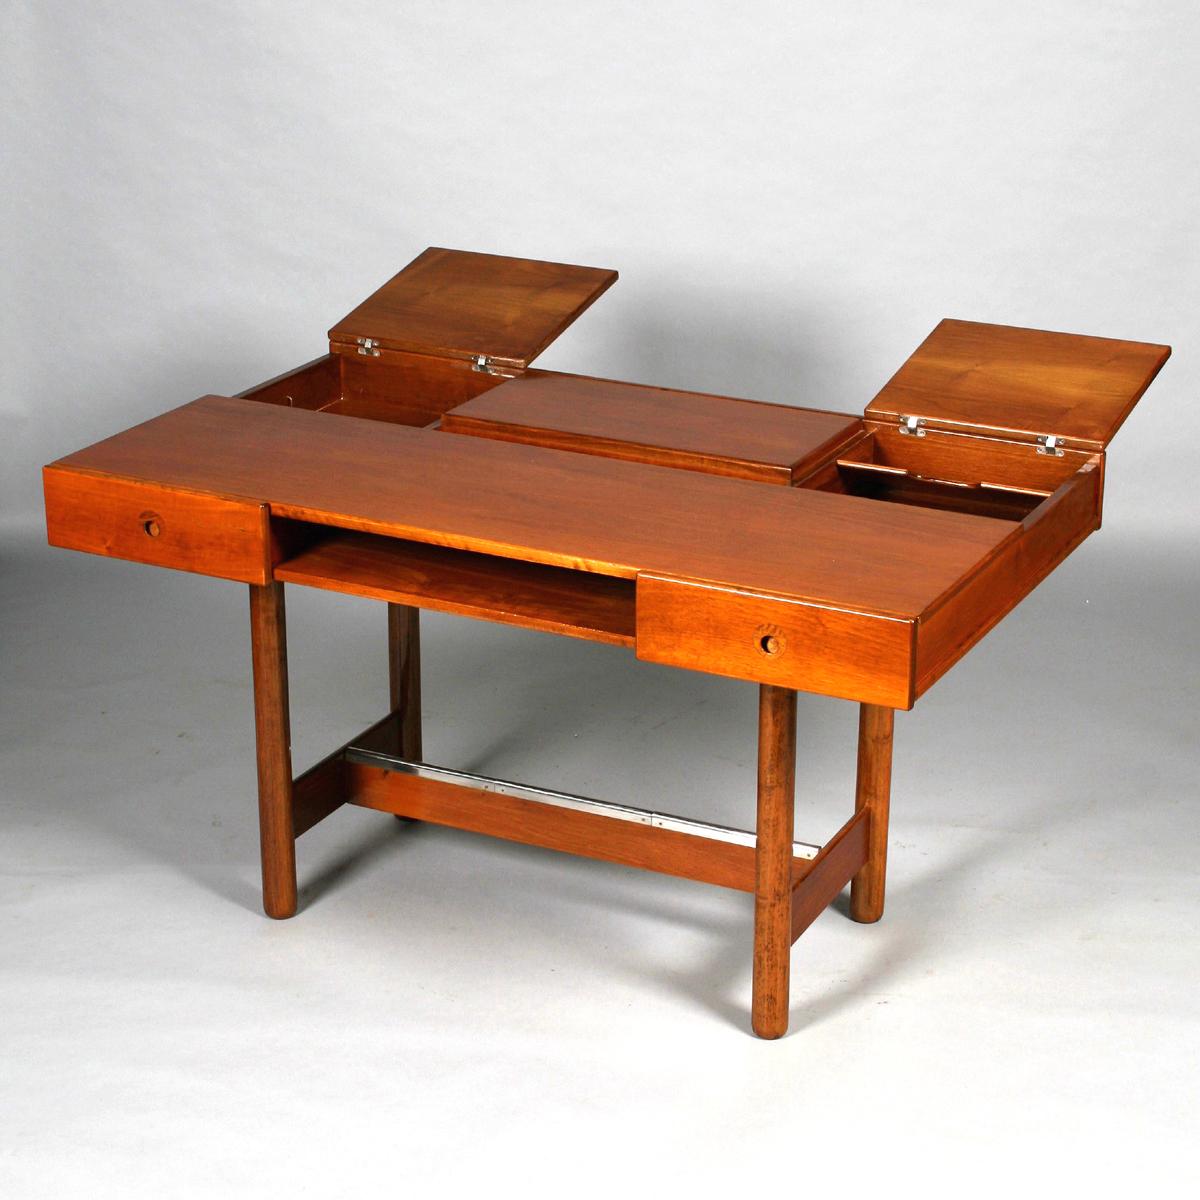 Fruitwood desk with chrome footrests by Saporiti. There are two drawers and a top that opens to gain access to storage compartments within.